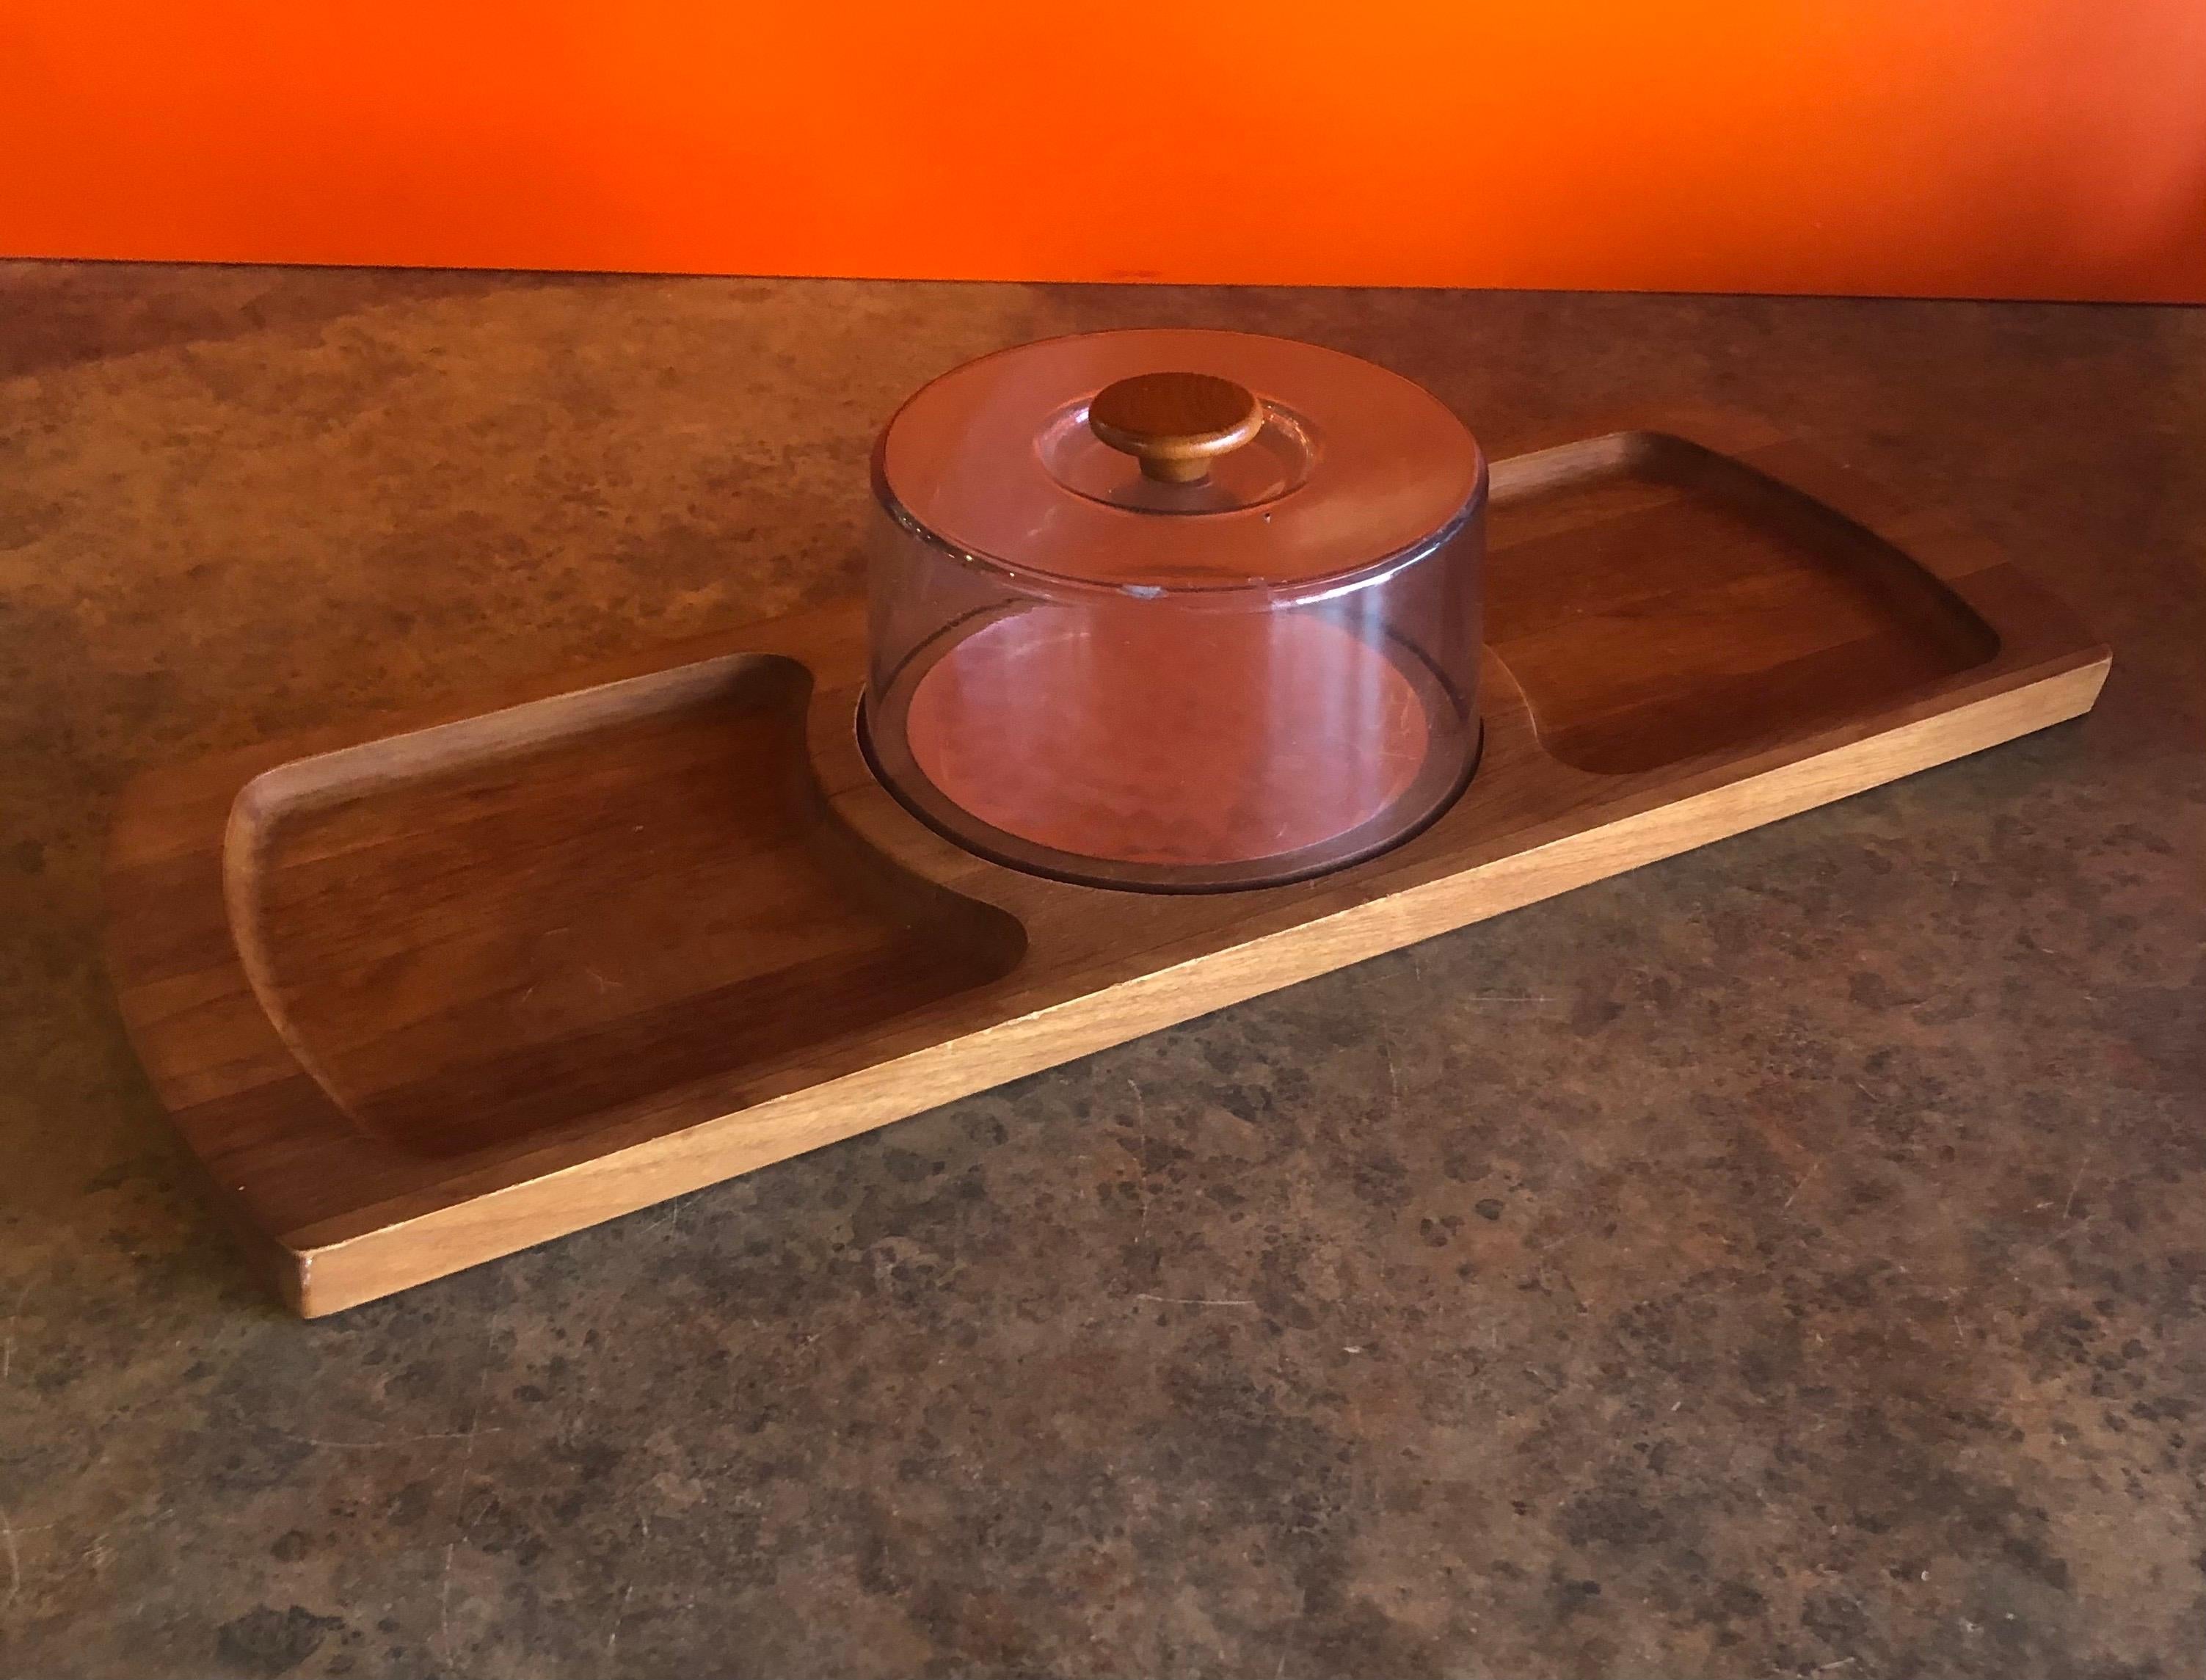 Midcentury Teak Tray / Cheese Board with Dome by Luthje Wood of Denmark In Good Condition For Sale In San Diego, CA